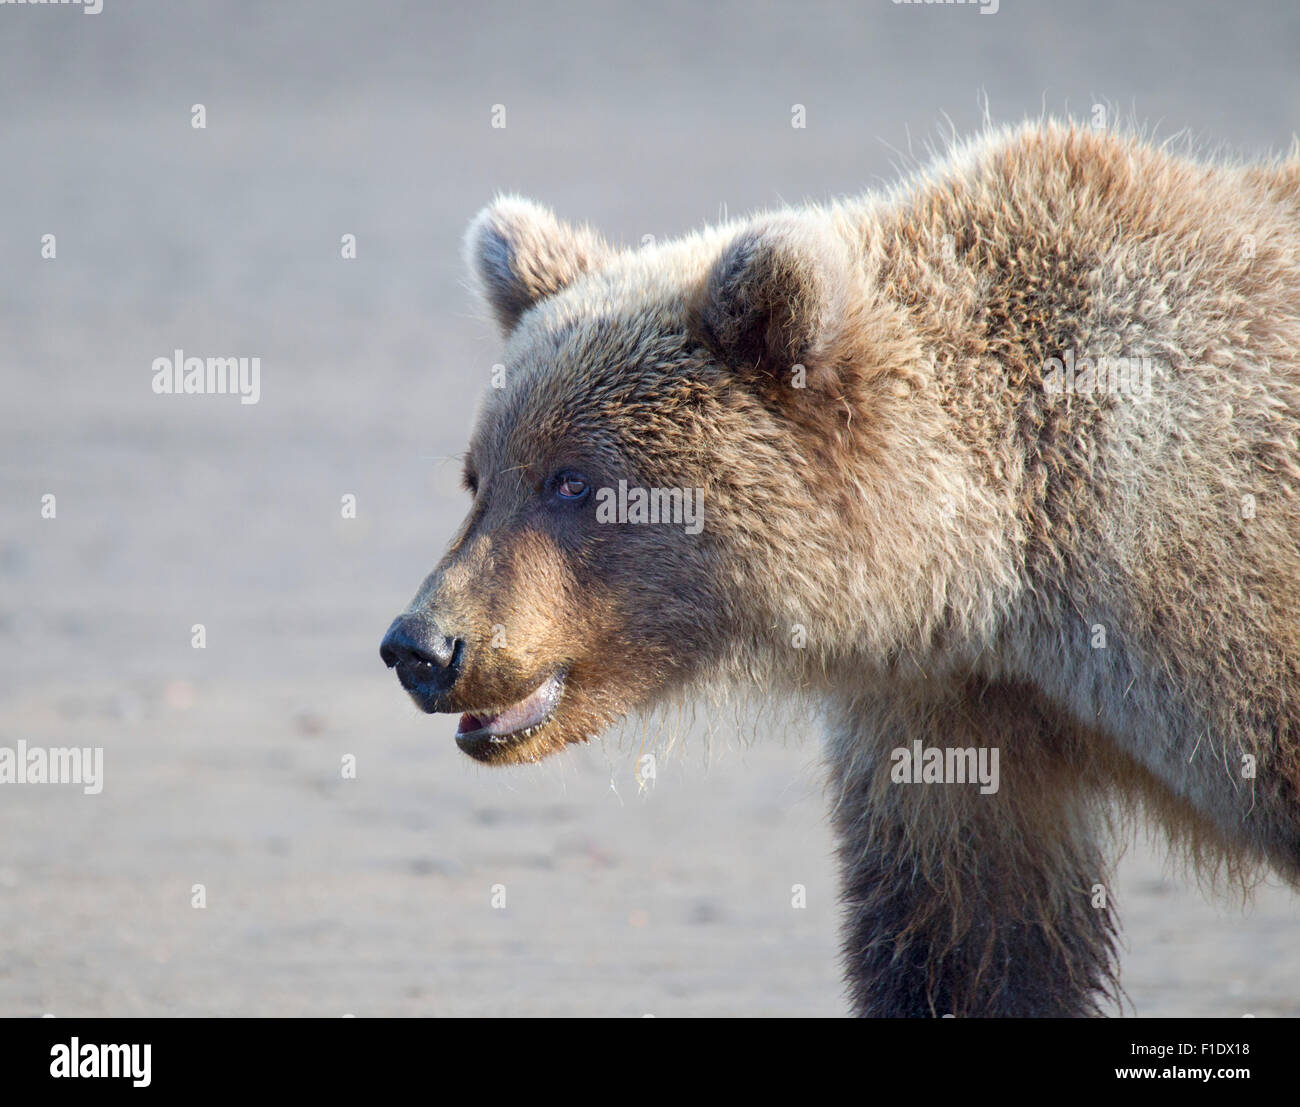 Second Year Grizzly Cub Portrait Stock Photo